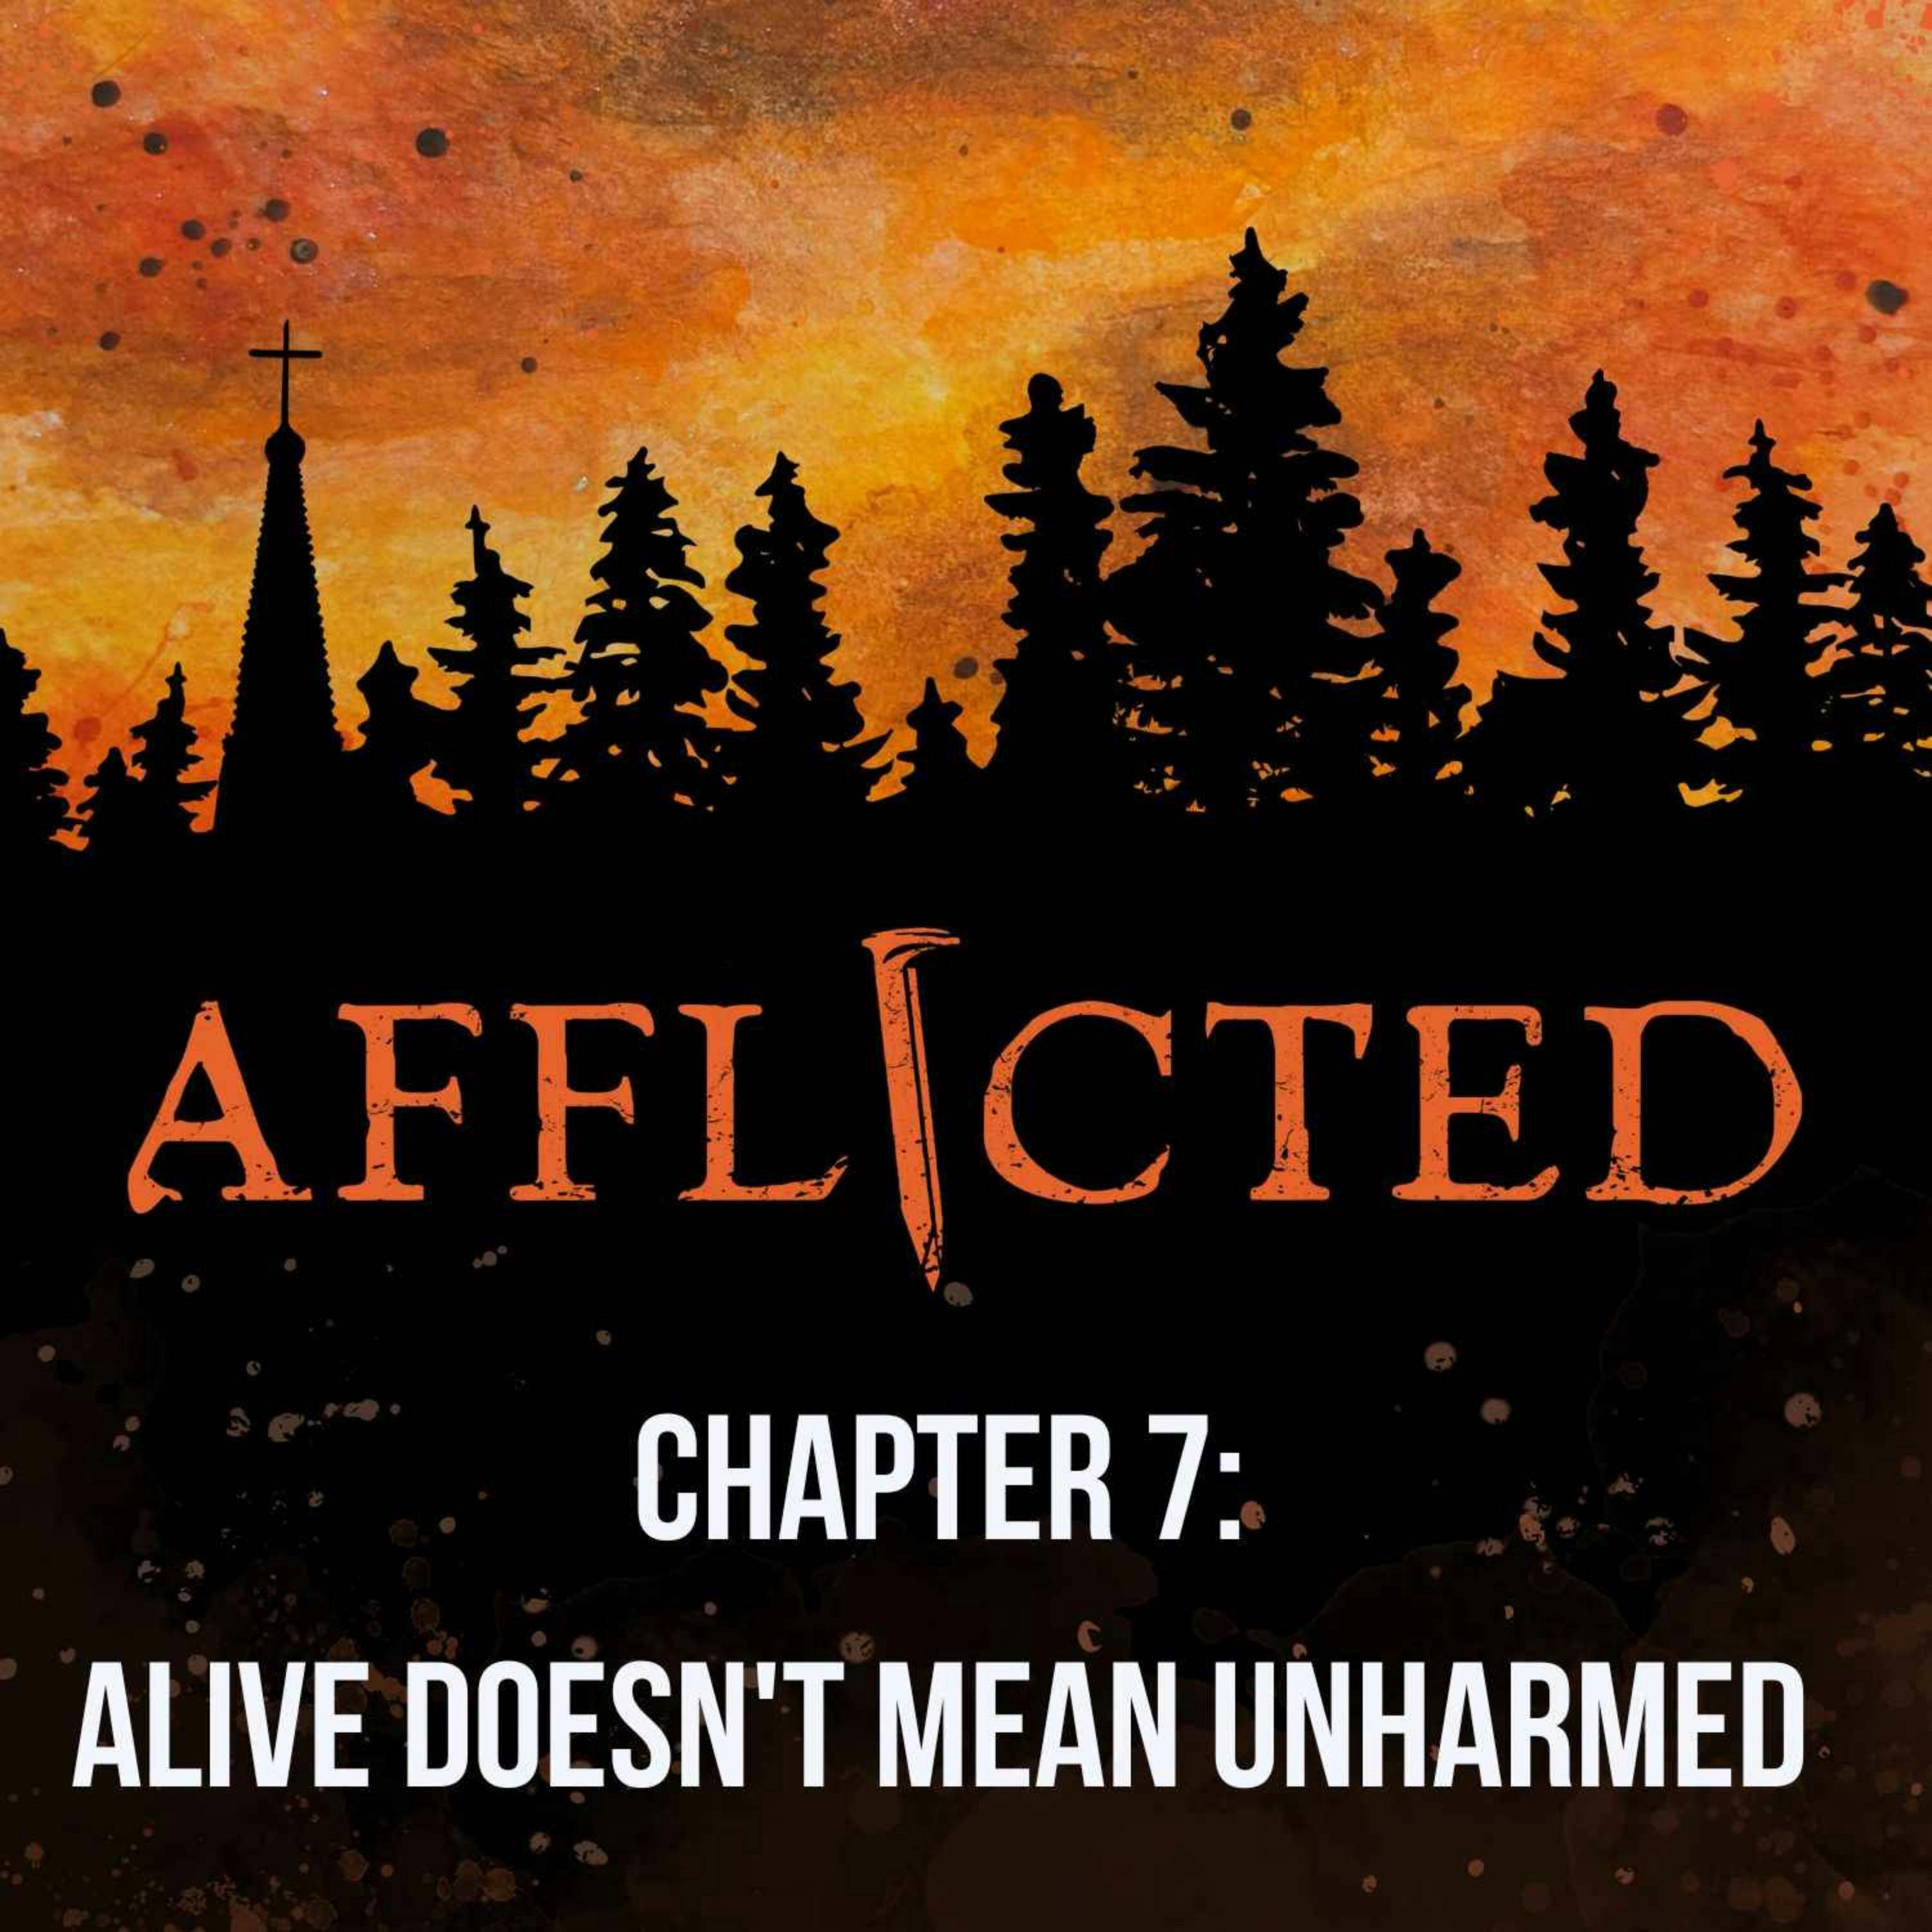 Chapter 7: Alive Doesn't Mean Unharmed